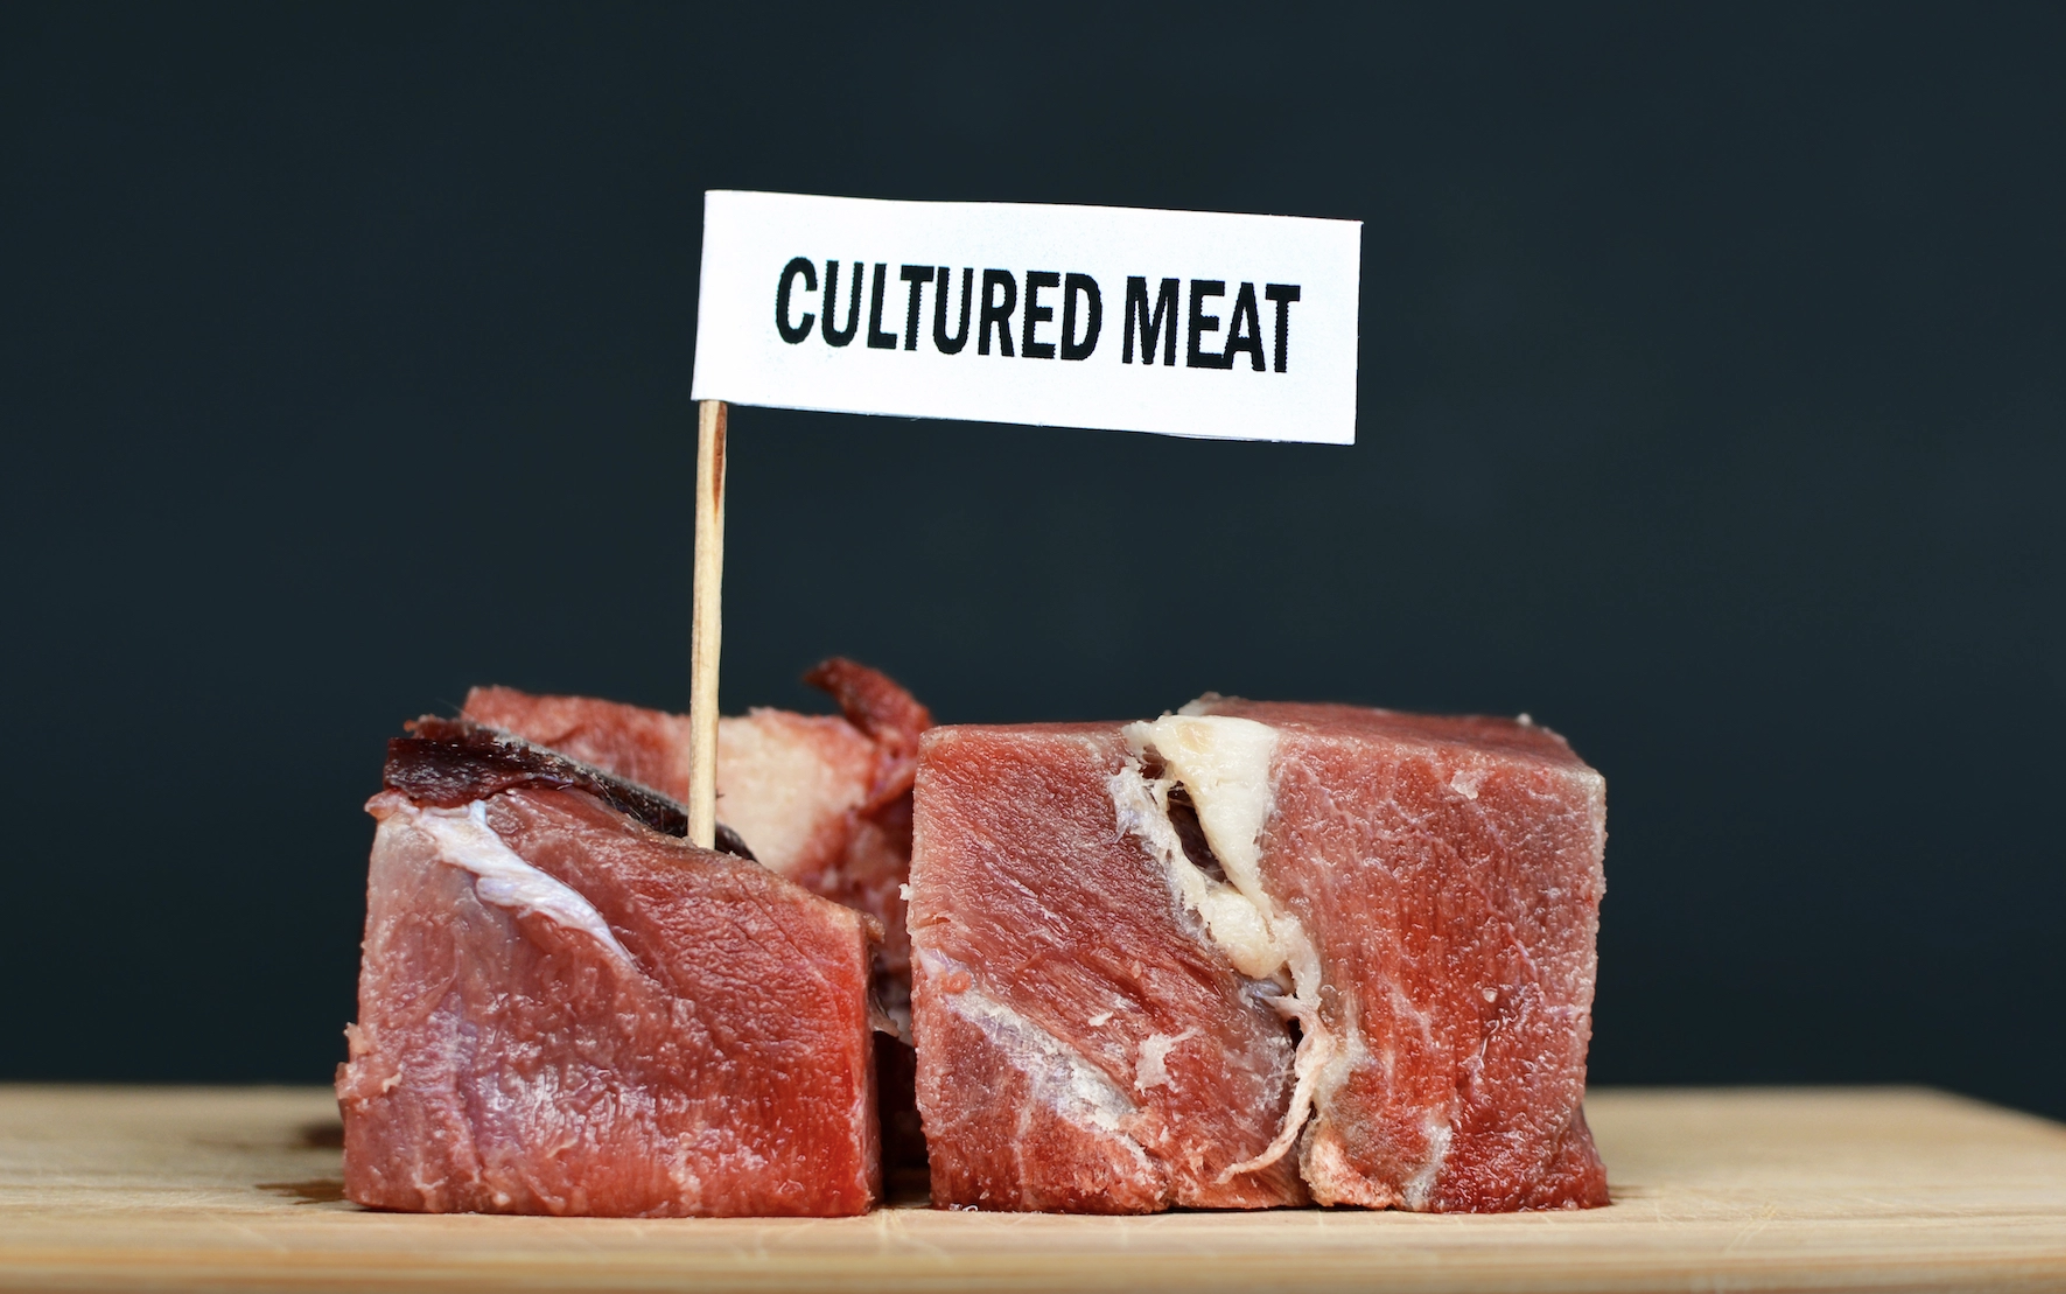 Cultured meat is produced by taking cells from an animal and using them to grow meat in a lab